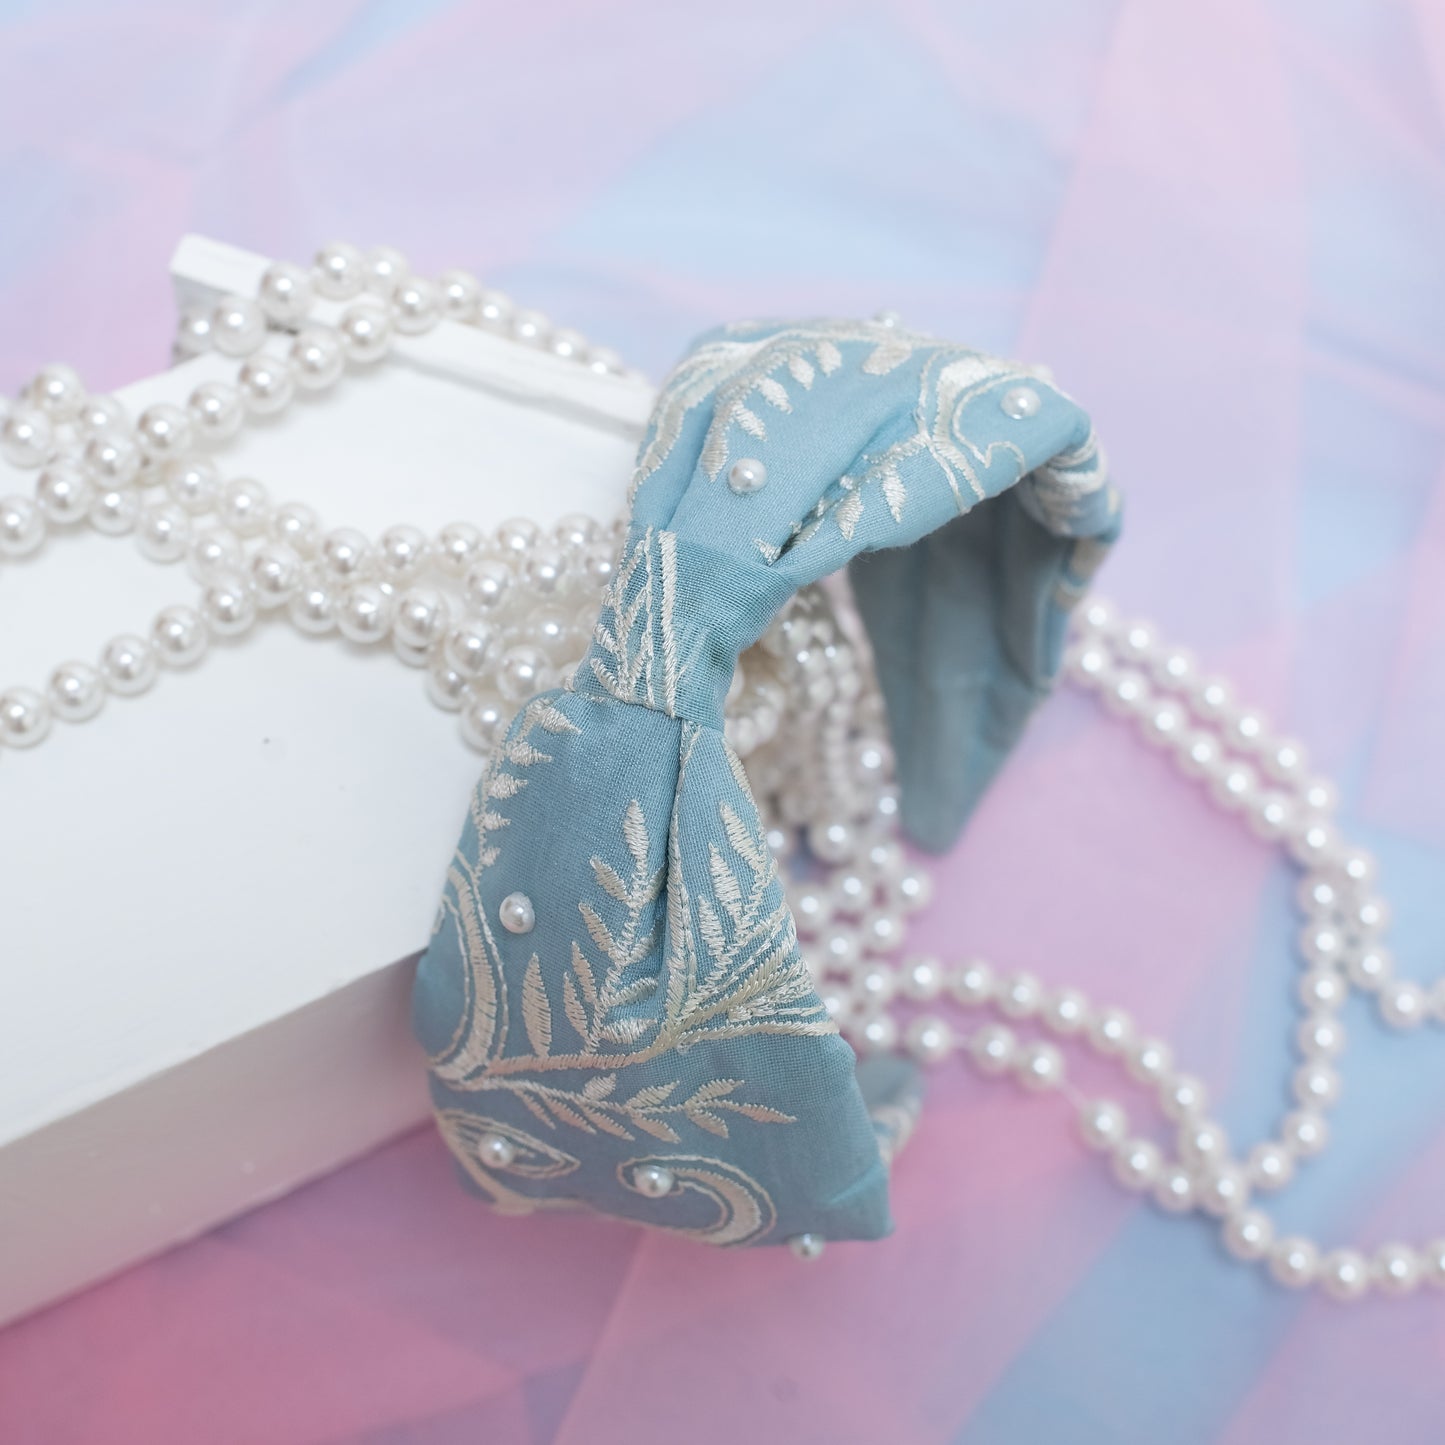 Embroidered Broad Hairband Embelished with Pearls - Sky Blue